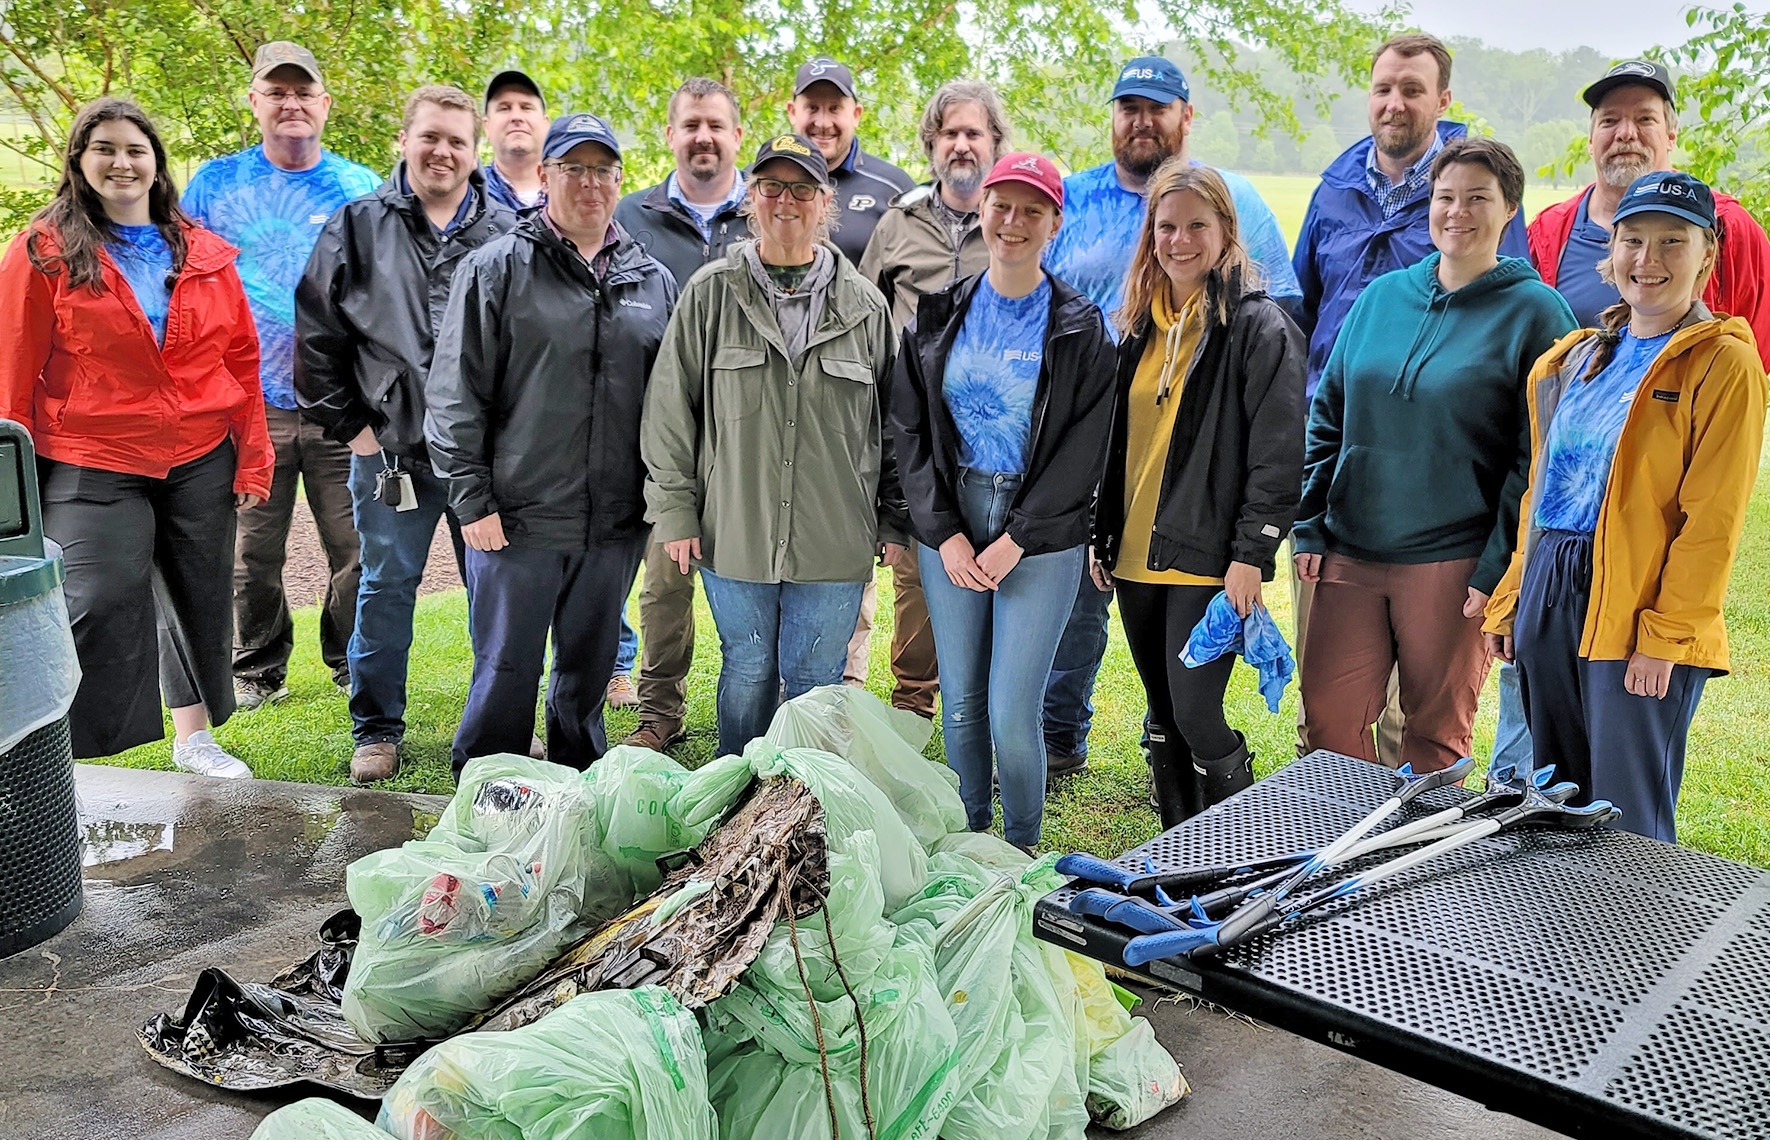 The results of a project team-led park clean-up